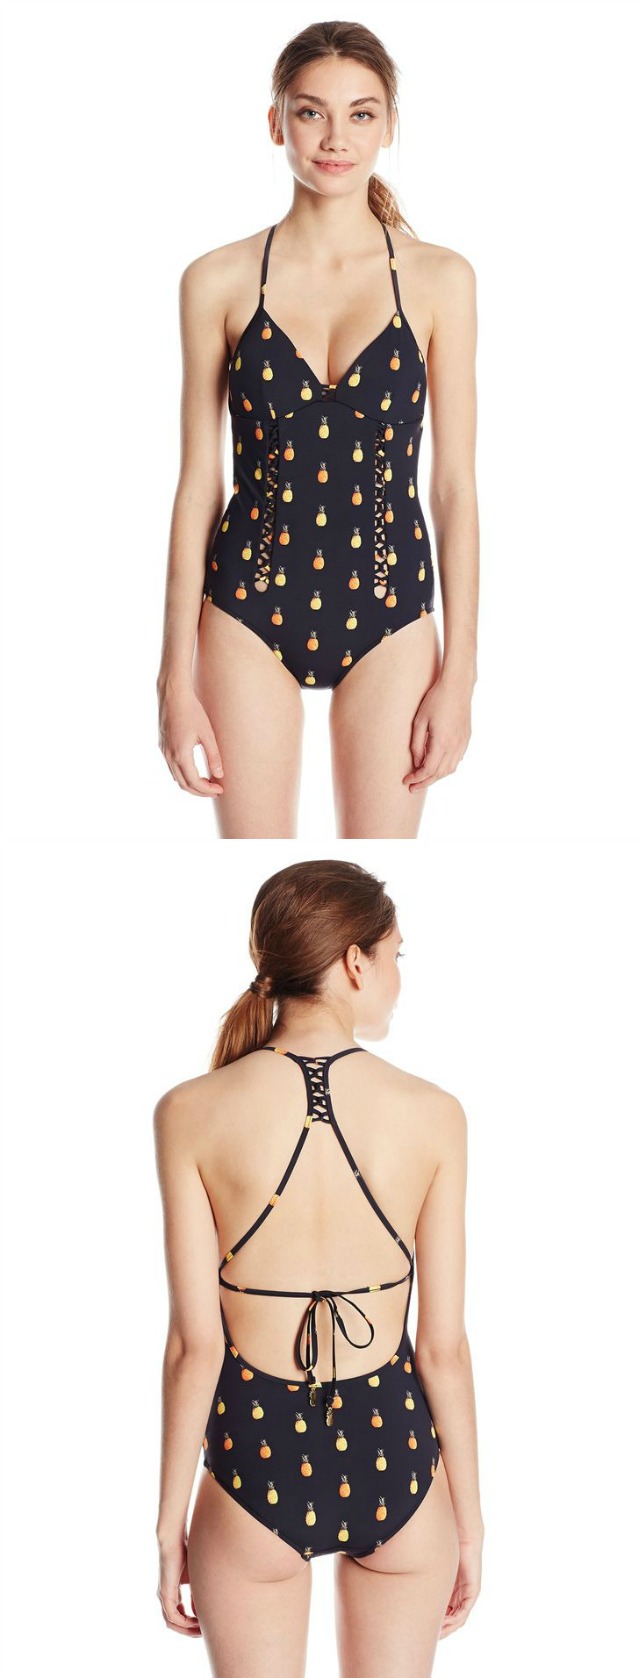 Swimsuits - Cutest swimsuits at the36thavenue.com MUST SEE! 